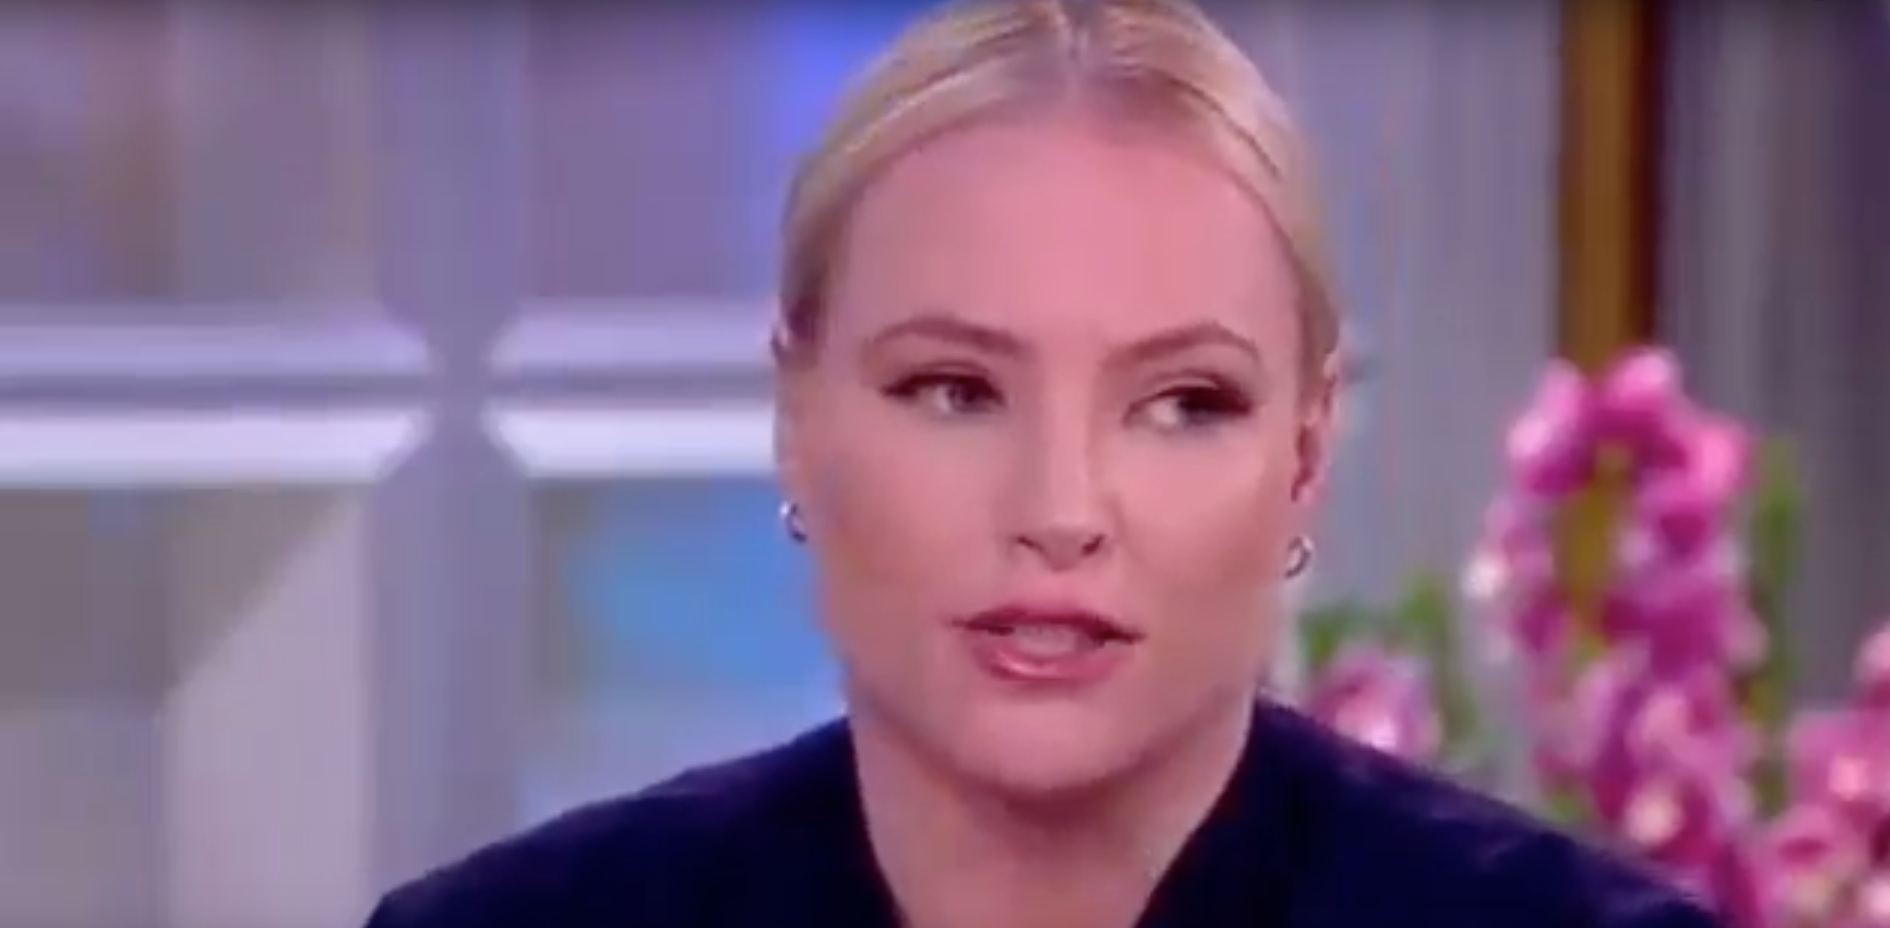 Meghan McCain talking about James Comey.